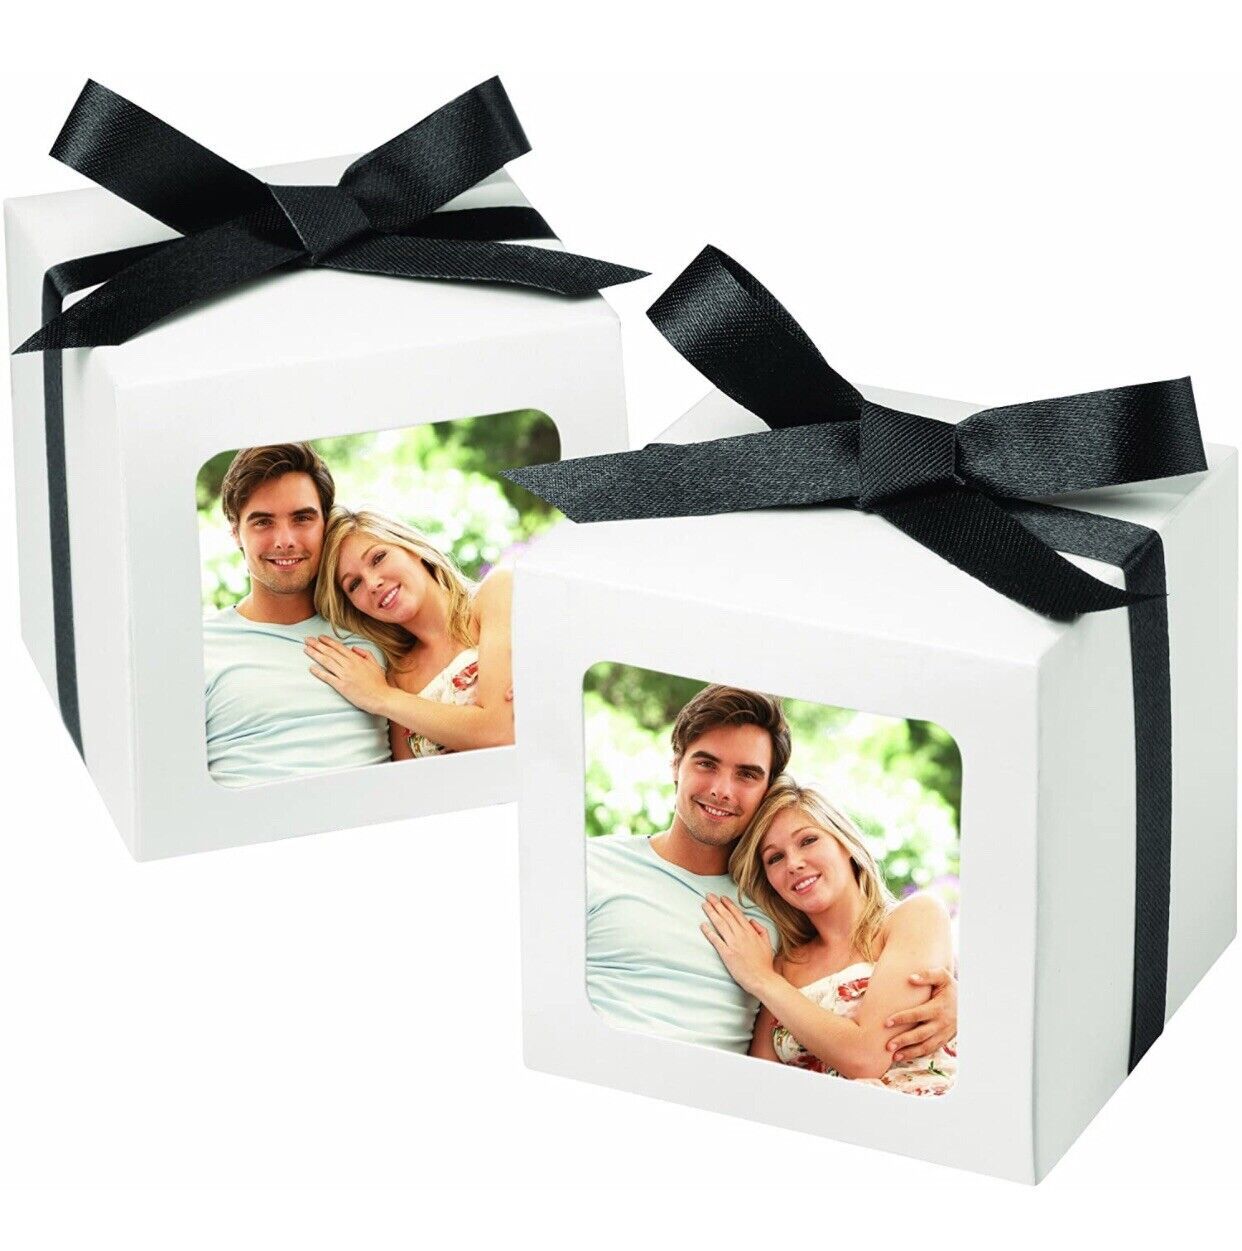 25 Photo Favor Box in White Kit by Wilton for parties weddings Bridal Shower - $8.41